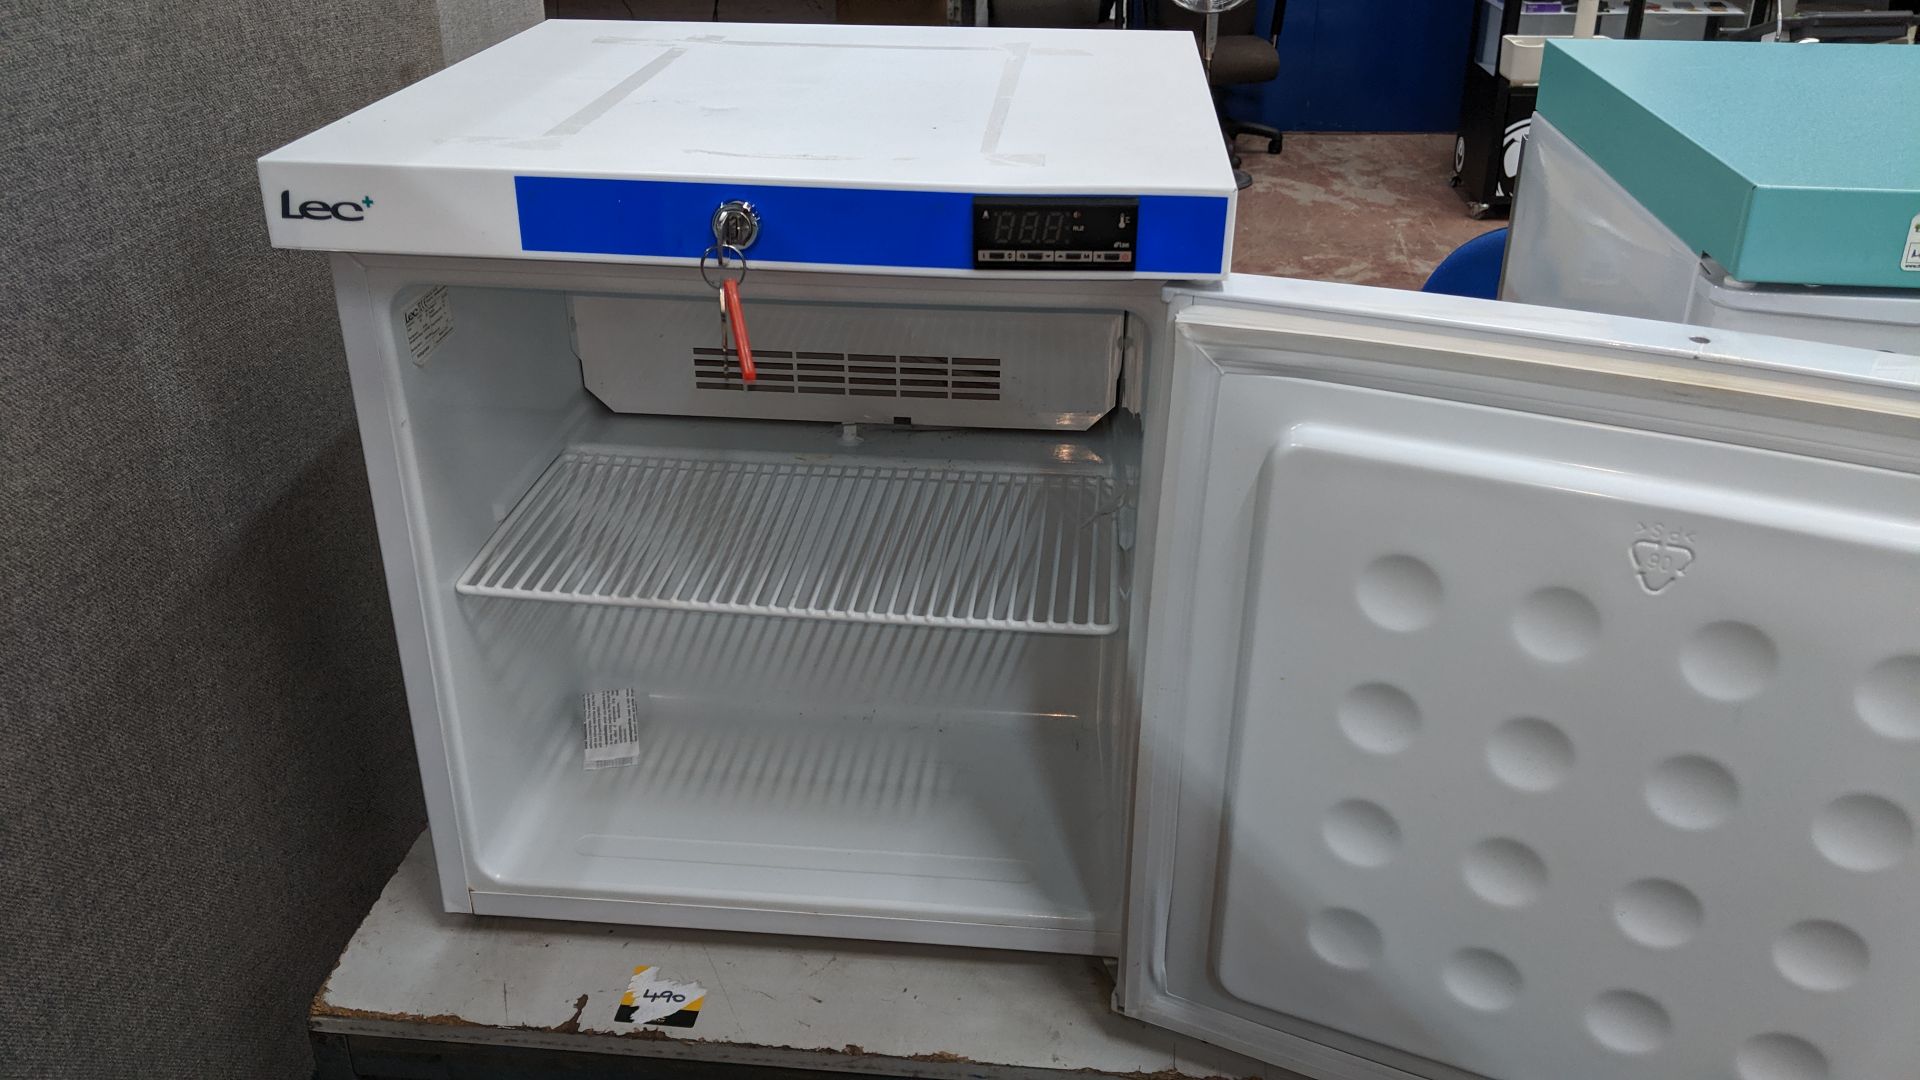 LEC lockable benchtop fridge with exterior digital display, model PE109, NO key. This is one of a - Image 3 of 5